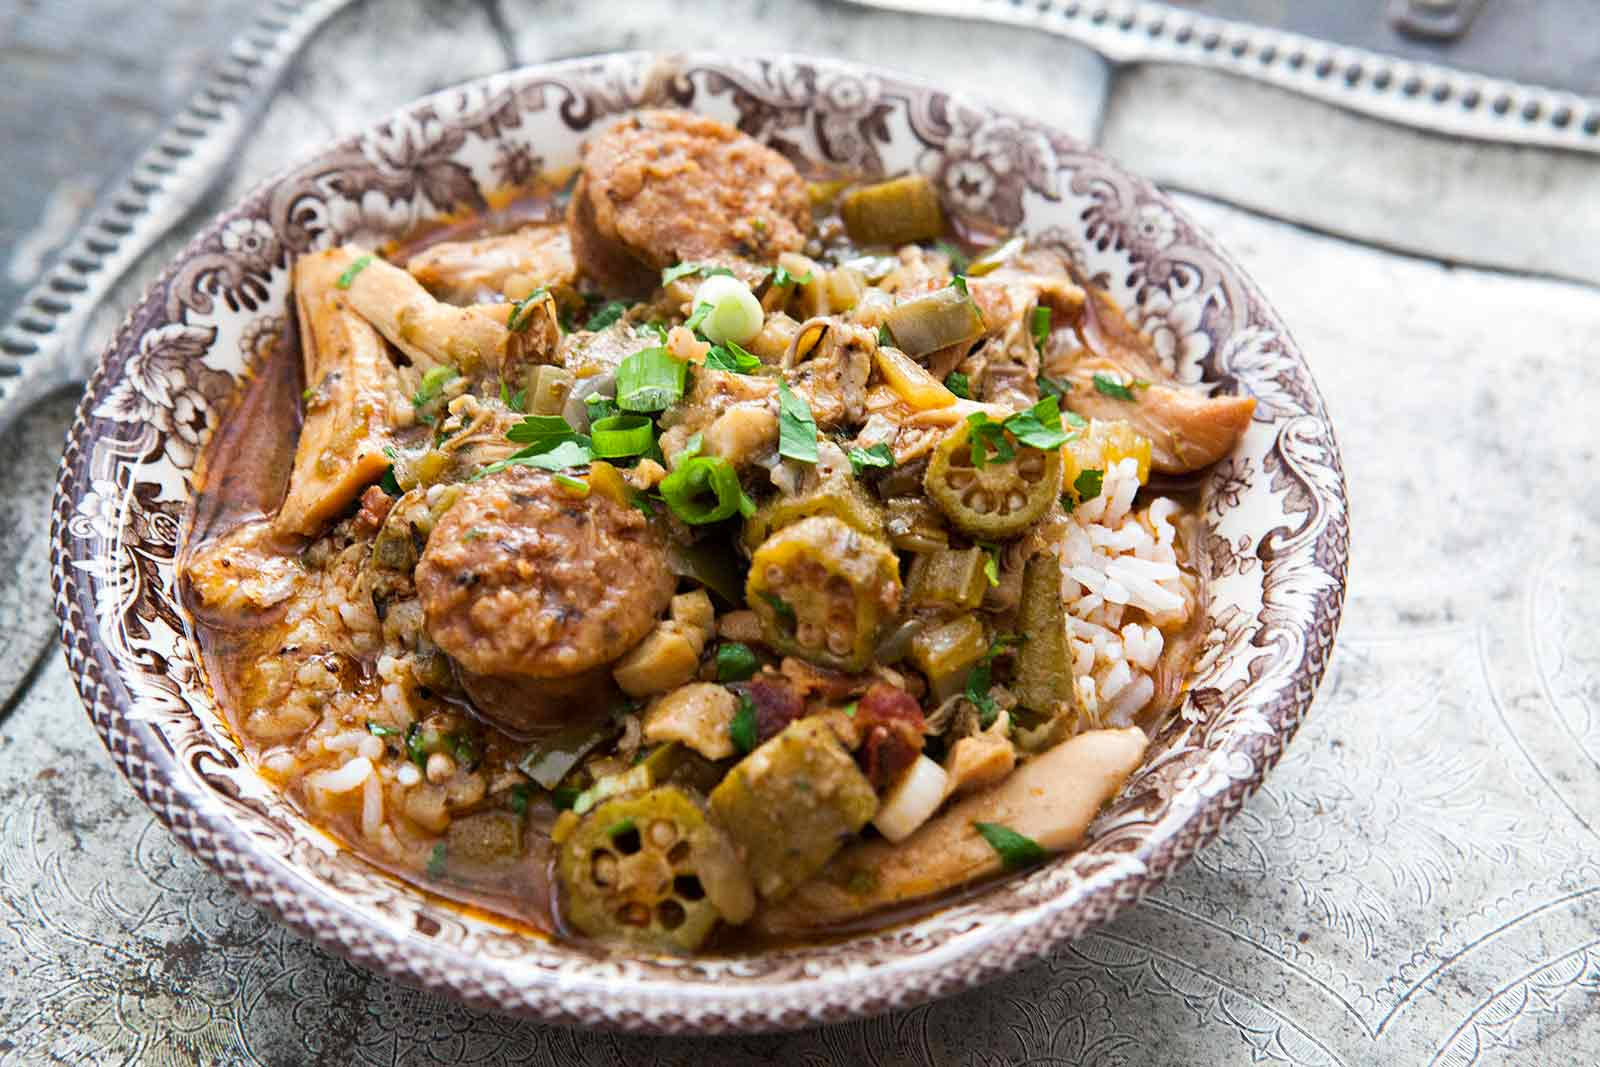 Gumbo Recipe Seafood Chicken And Sausage
 Chicken Gumbo with Andouille Sausage Recipe